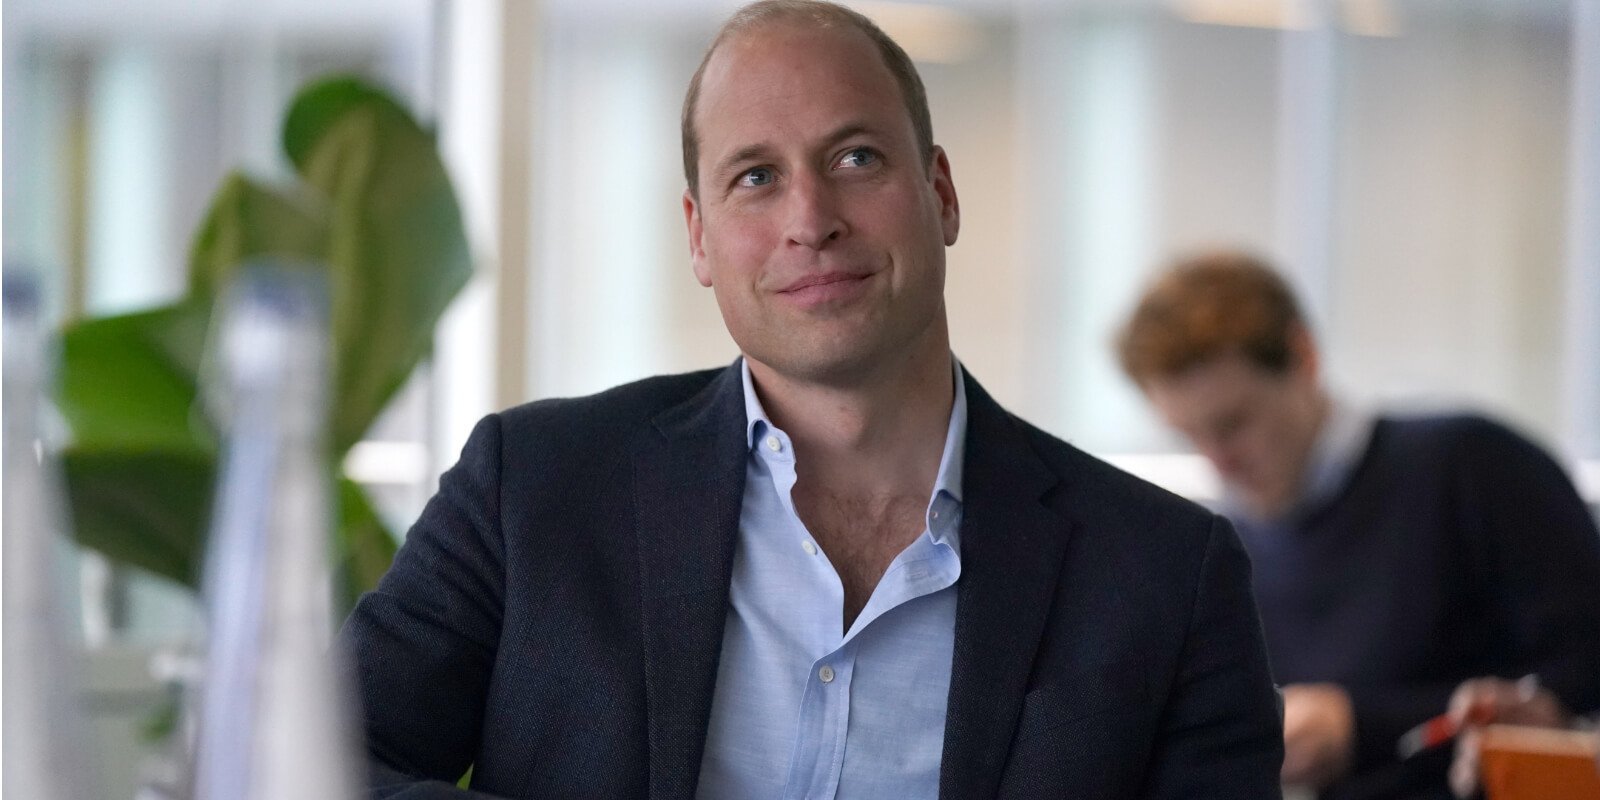 Prince William, Duke of Cambridge smiles during a visit to Microsoft HQ on November 18, 2021 in Reading, England.